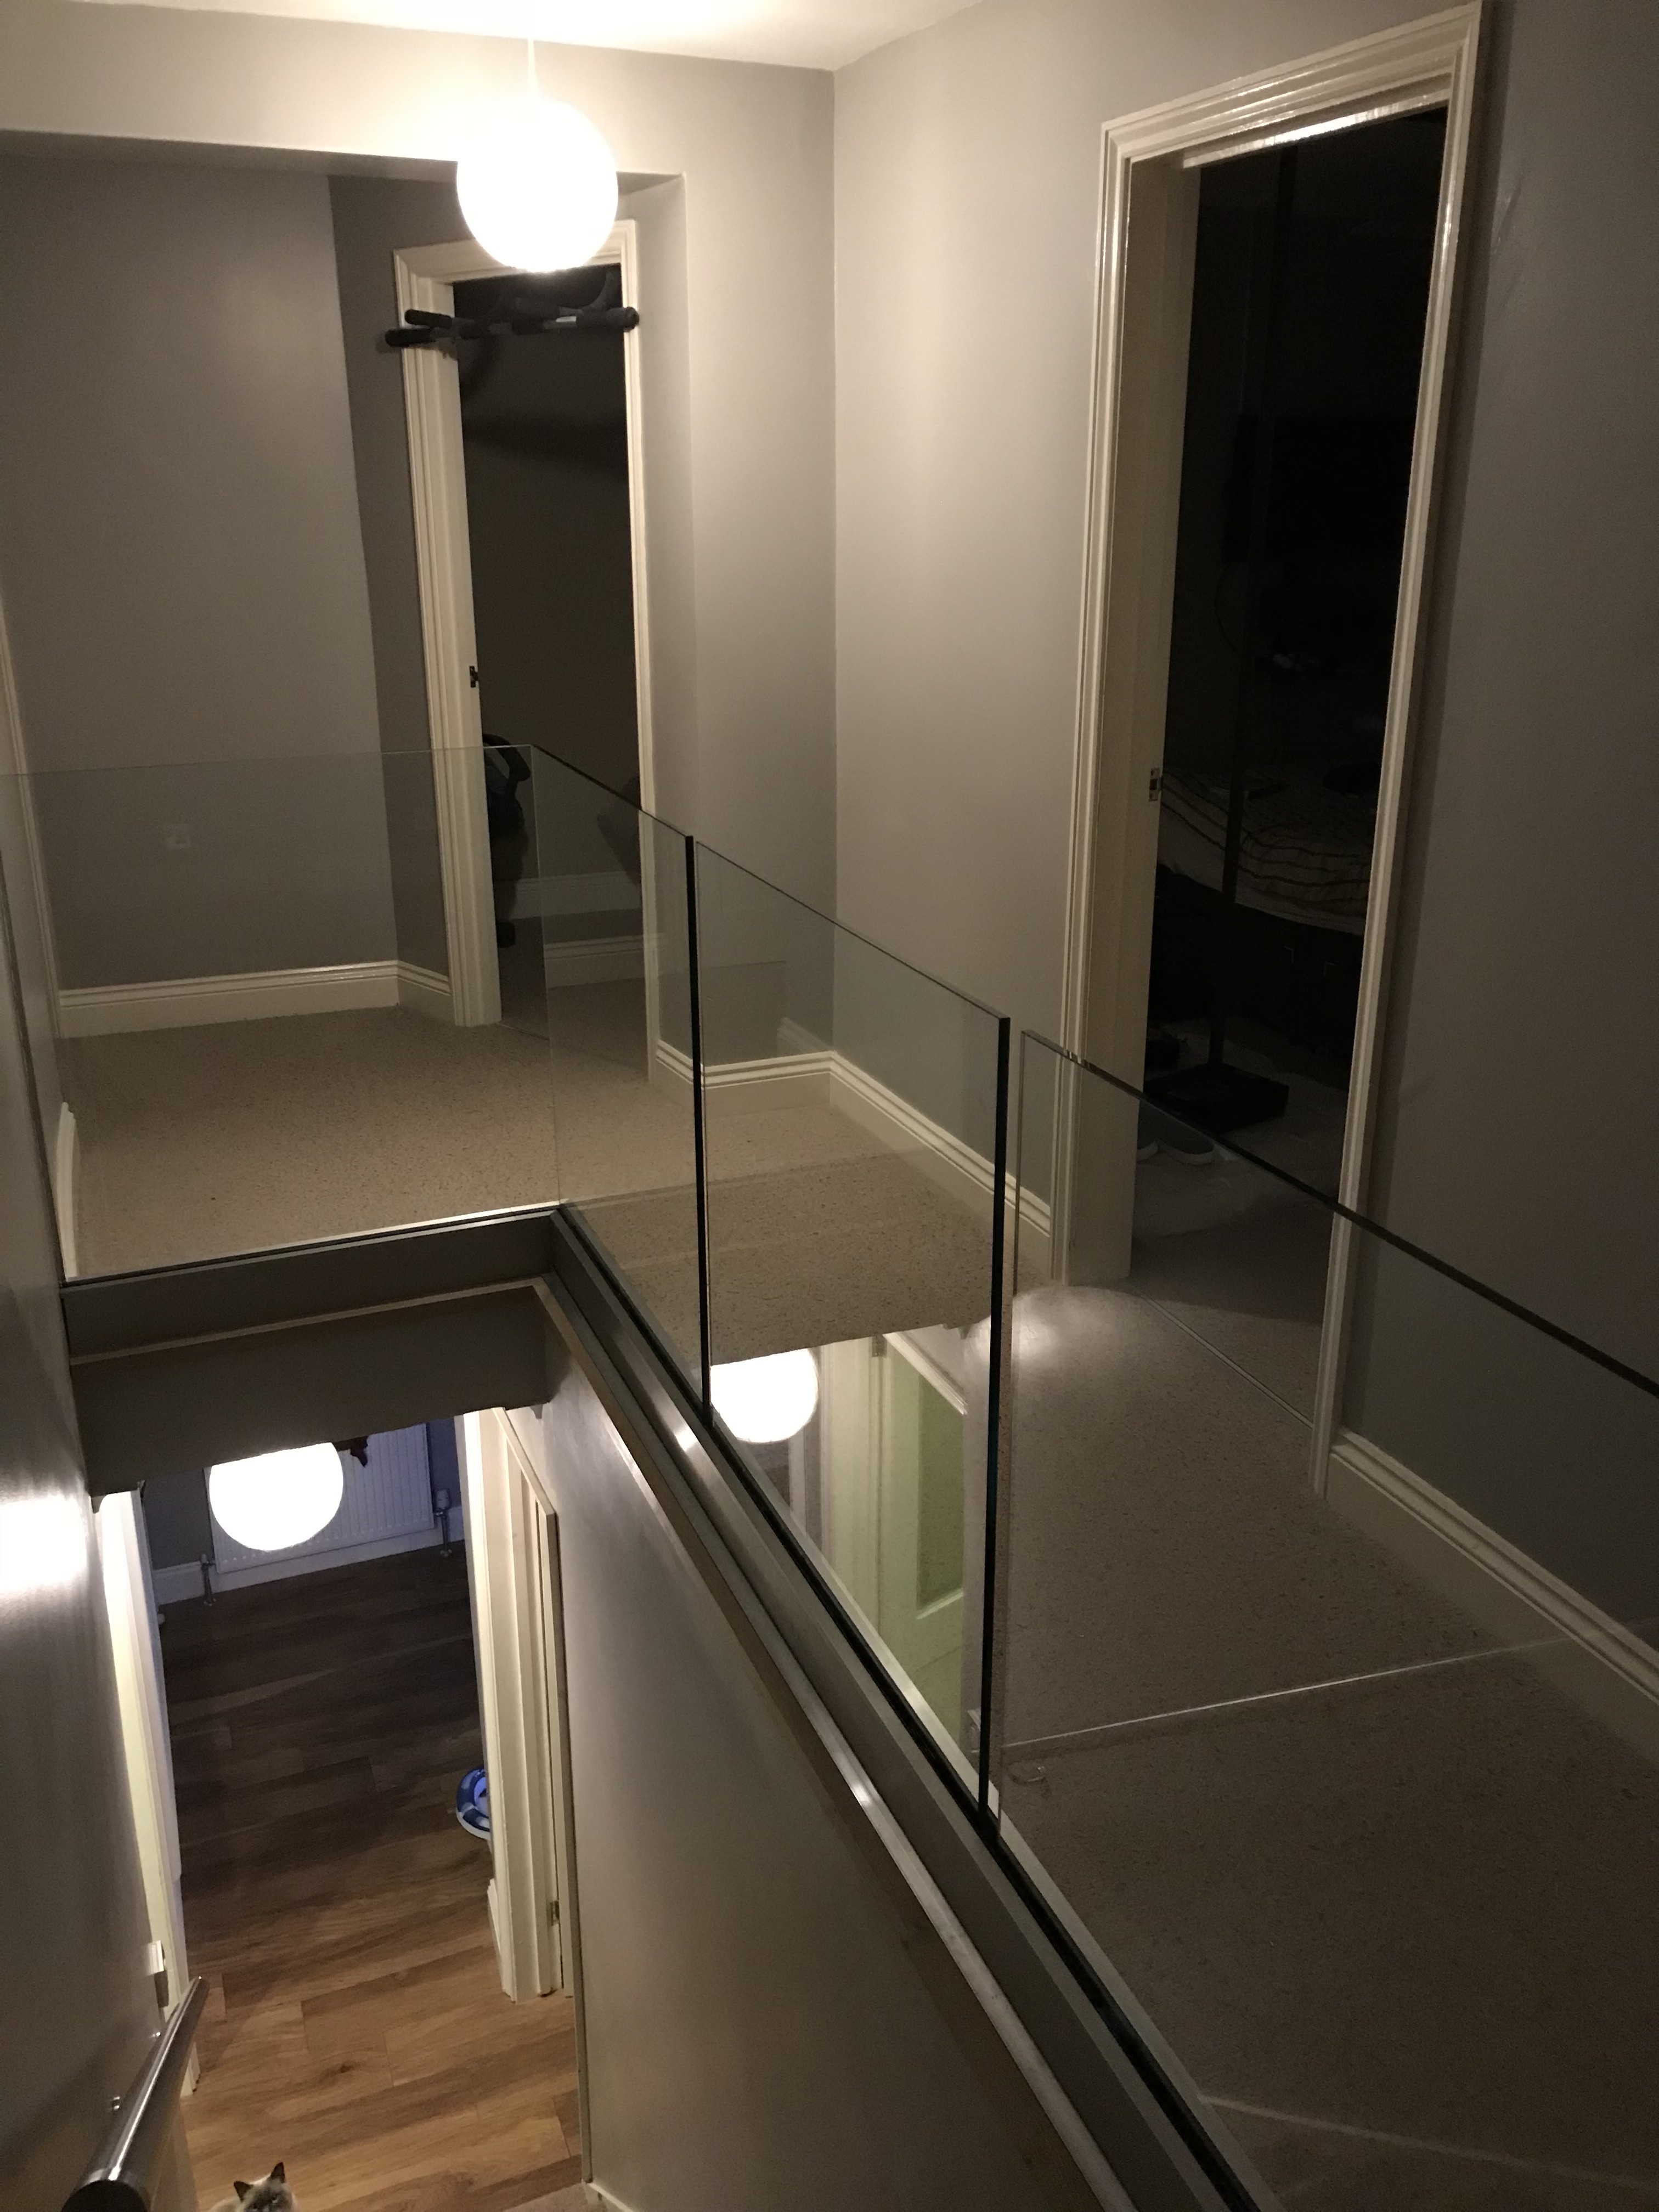 Vantage balustrades supplied there glass balustrade system for this landing area in London